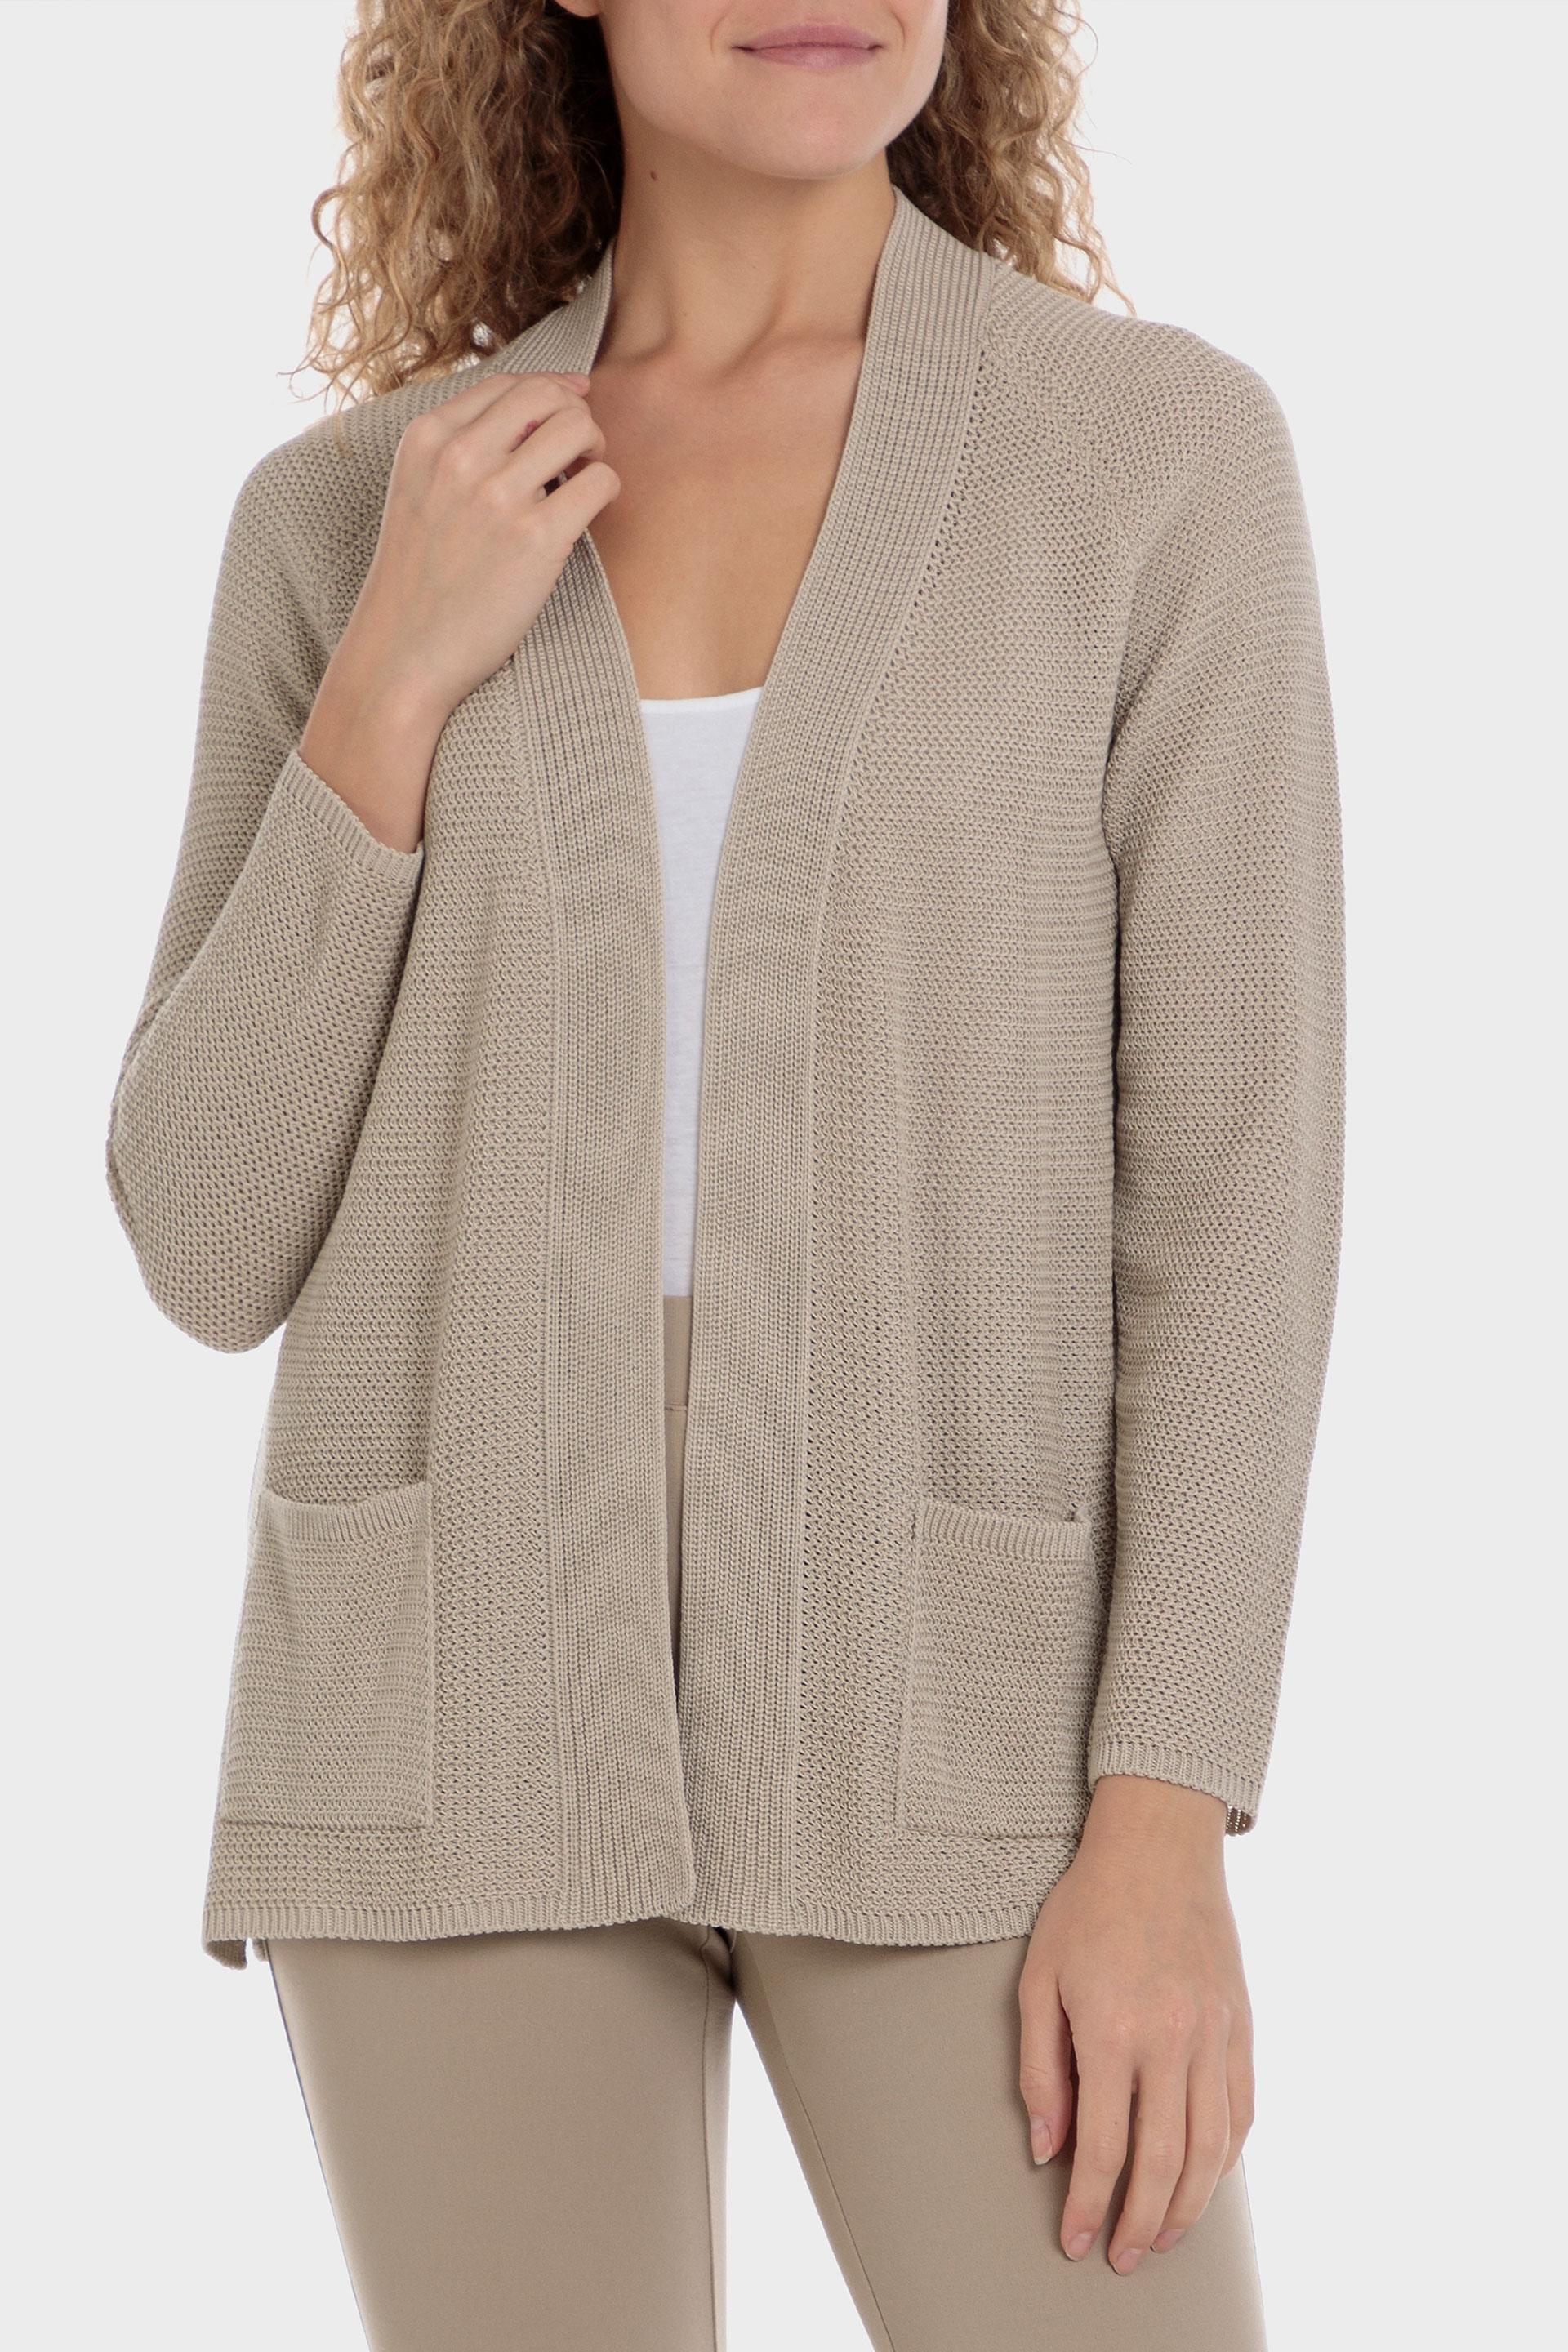 Punt Roma - Beige Jacket With Pockets